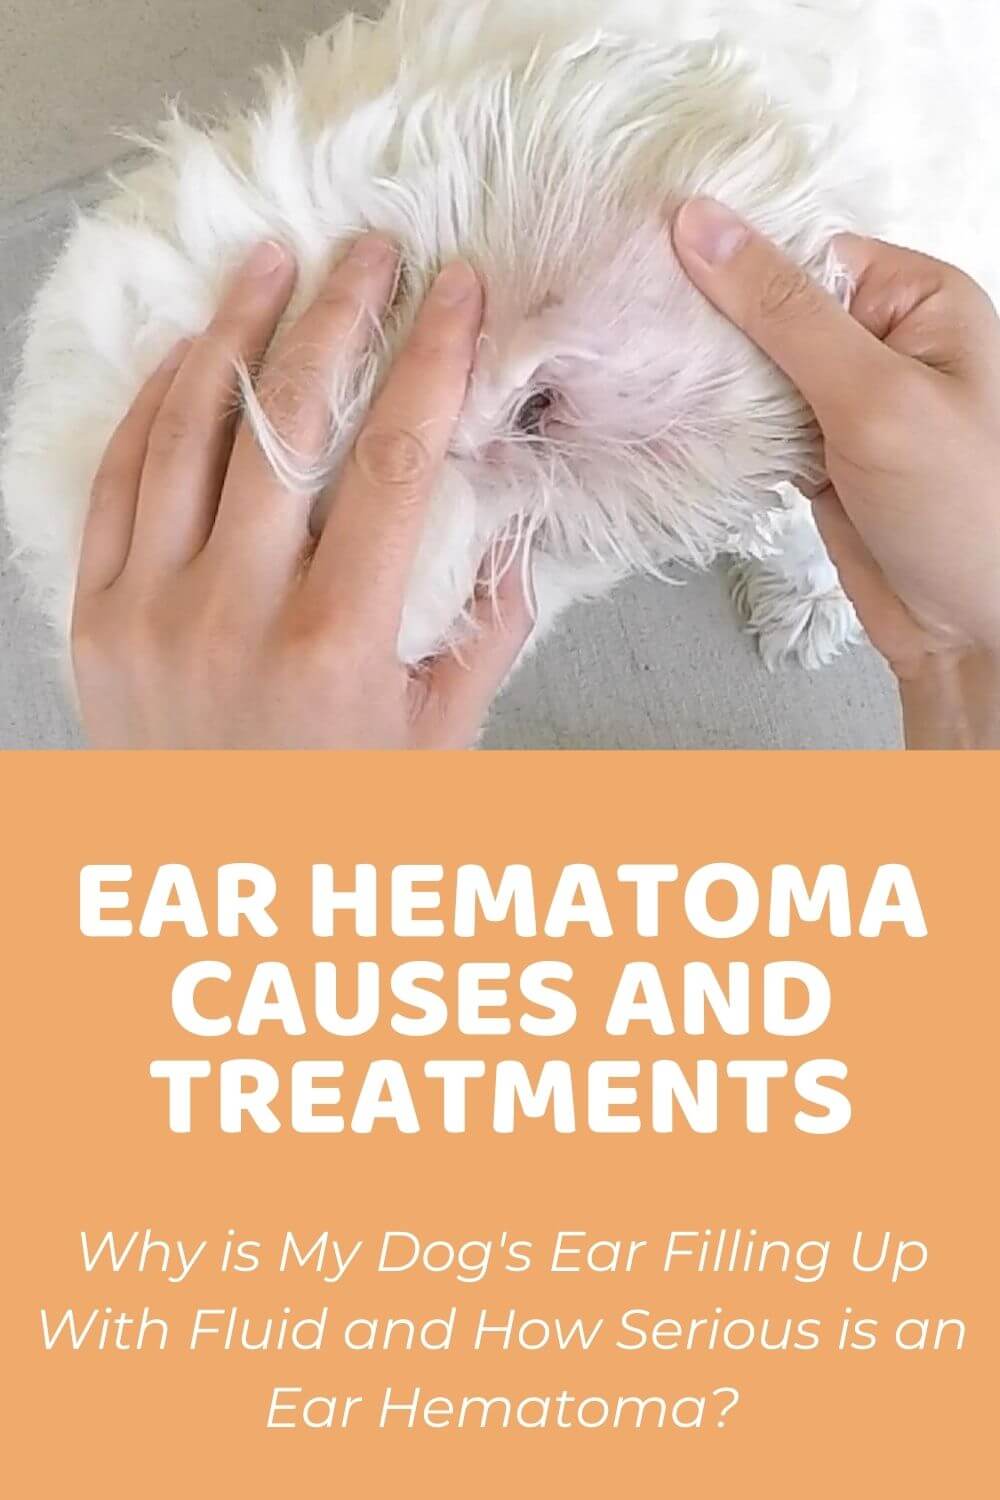 Dog Ear Hematoma Causes and Treatments